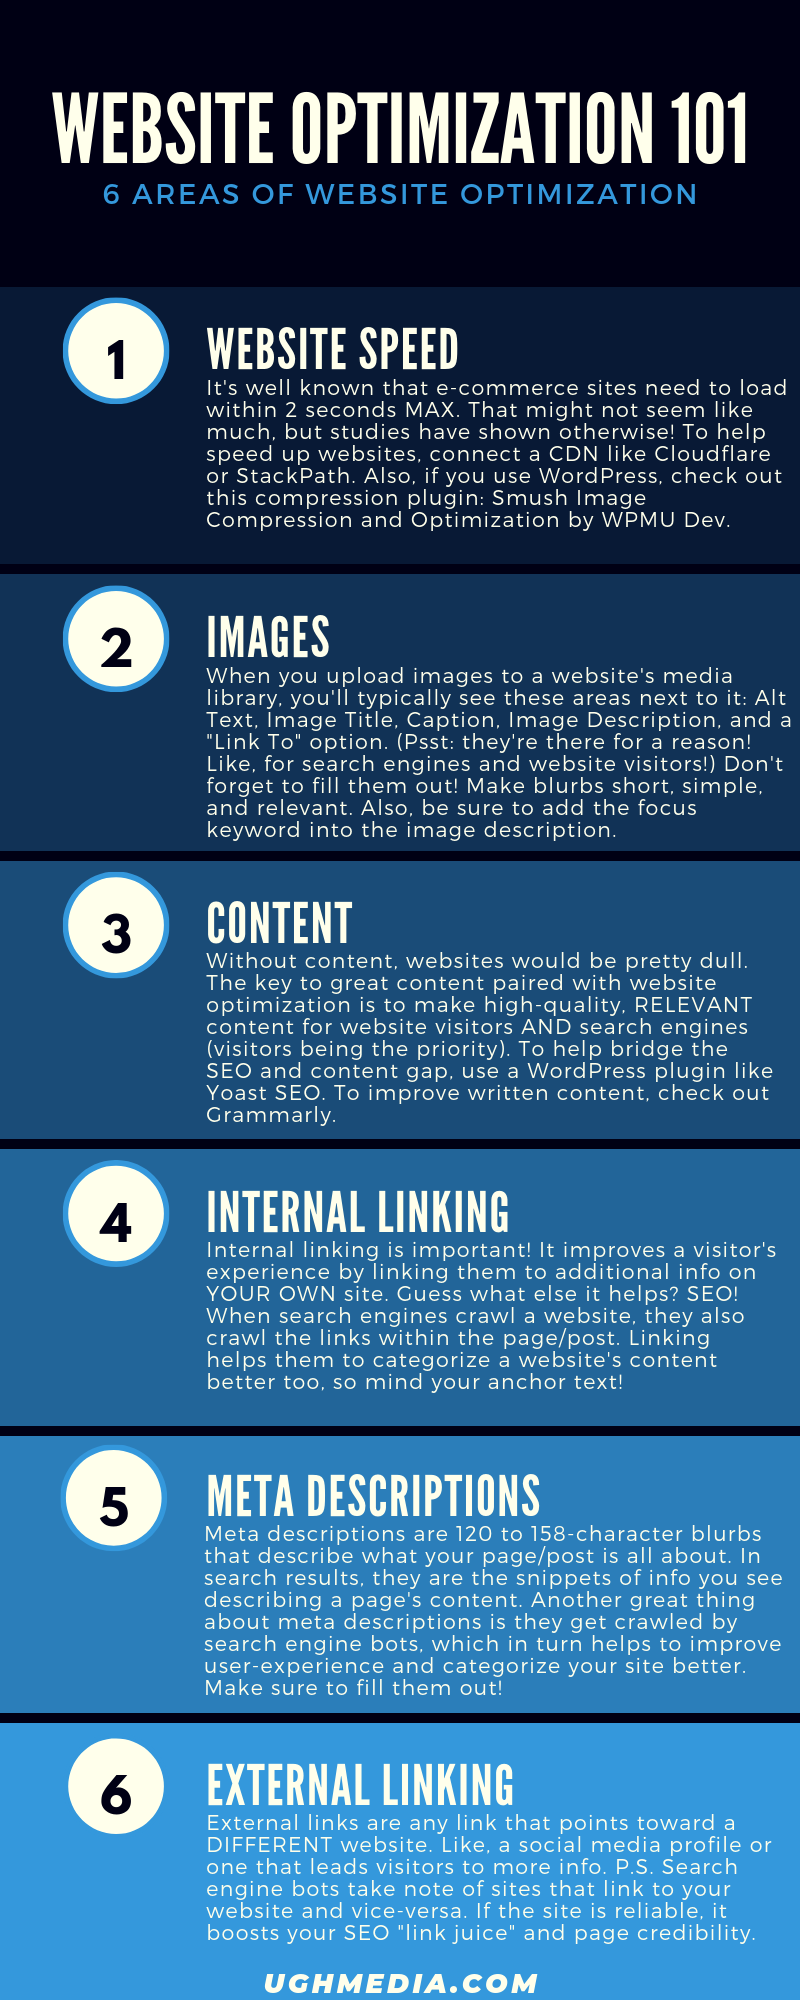 6 Areas of Website Optimization [Infographic]